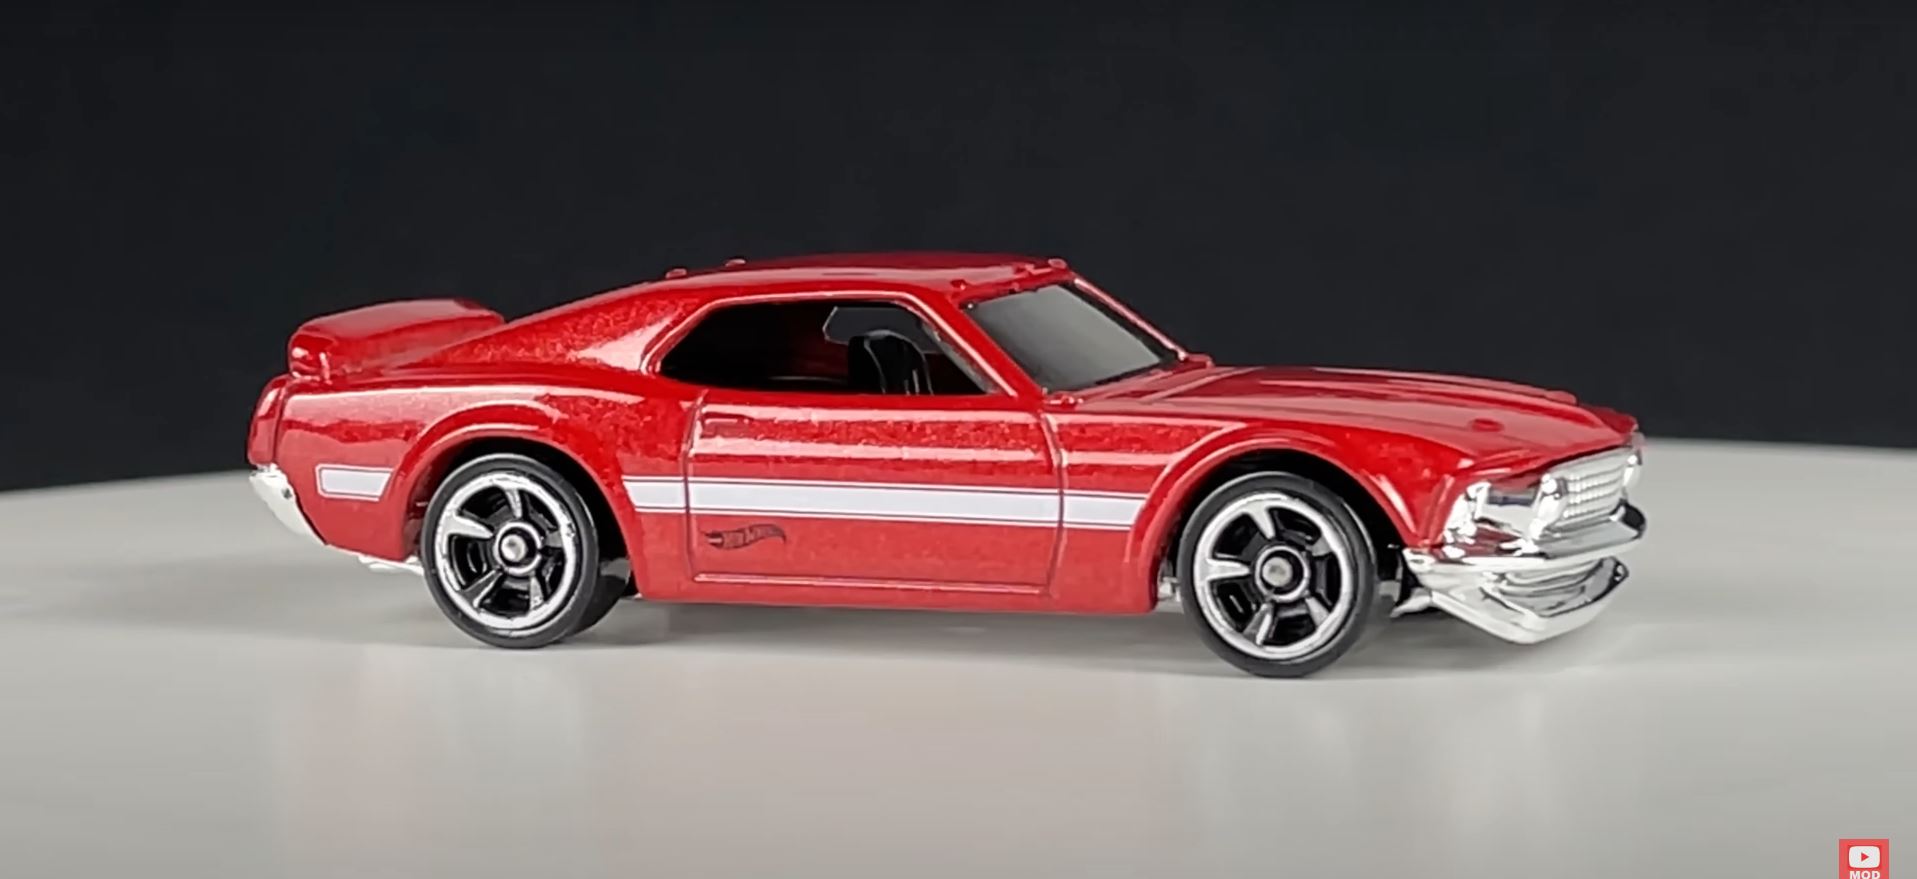 Hot Wheels Celebrates the Ford Mustang With a New 5-Pack, There